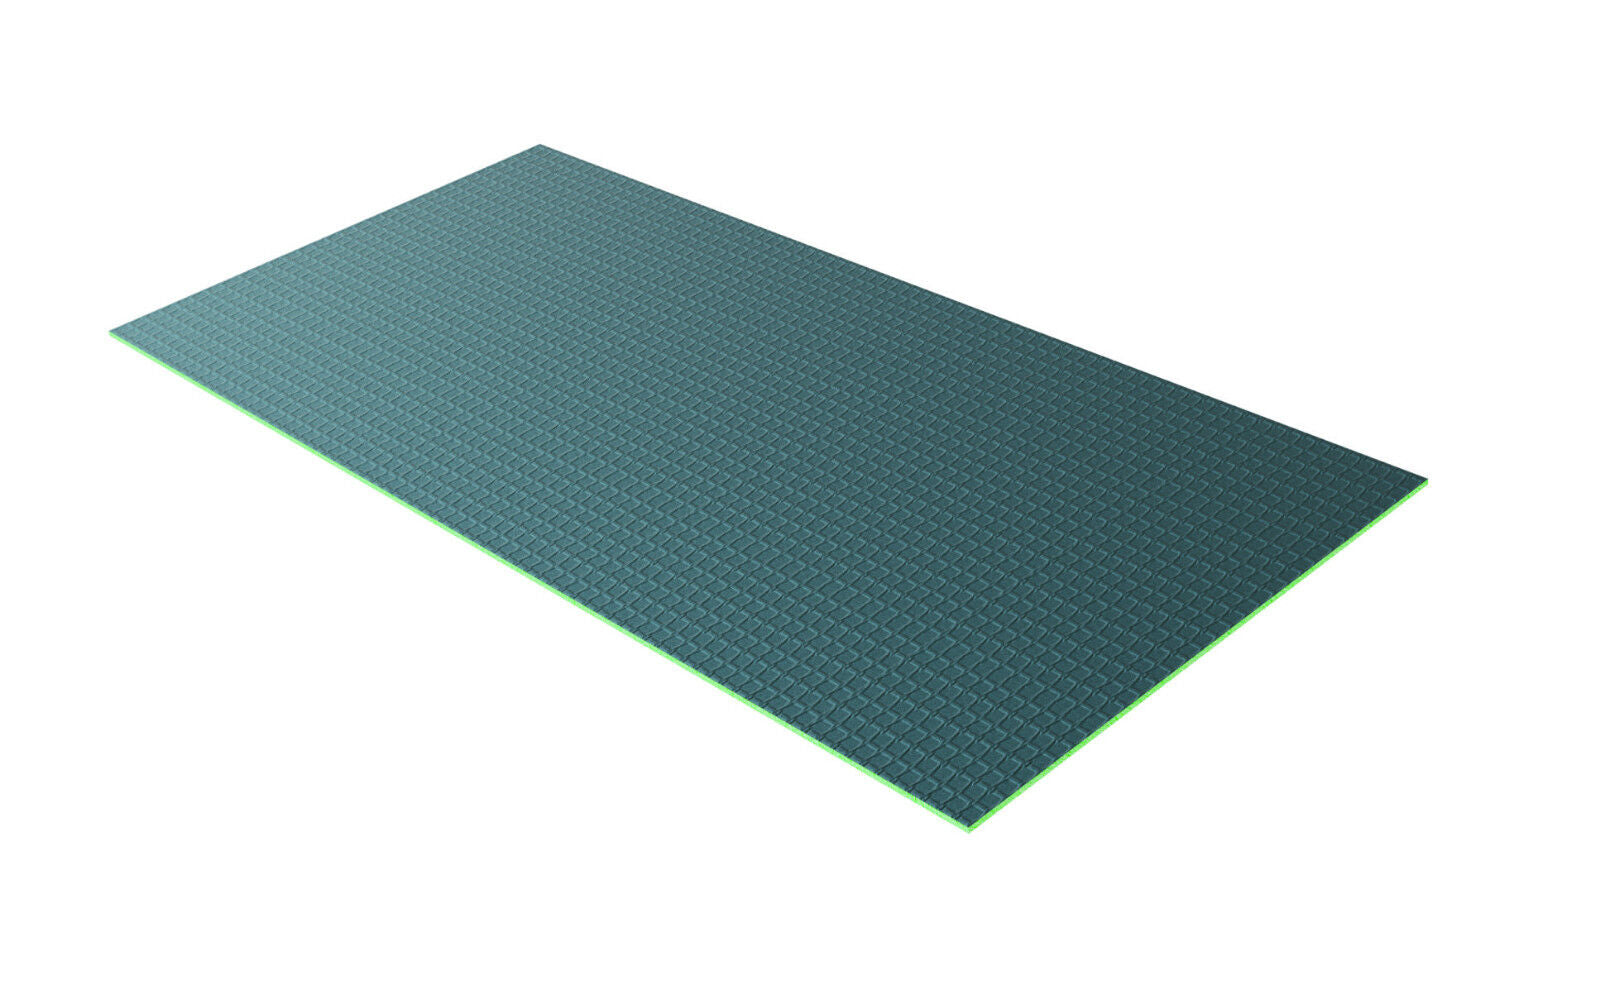 Cement Coated Insulation Tile Backer Boards